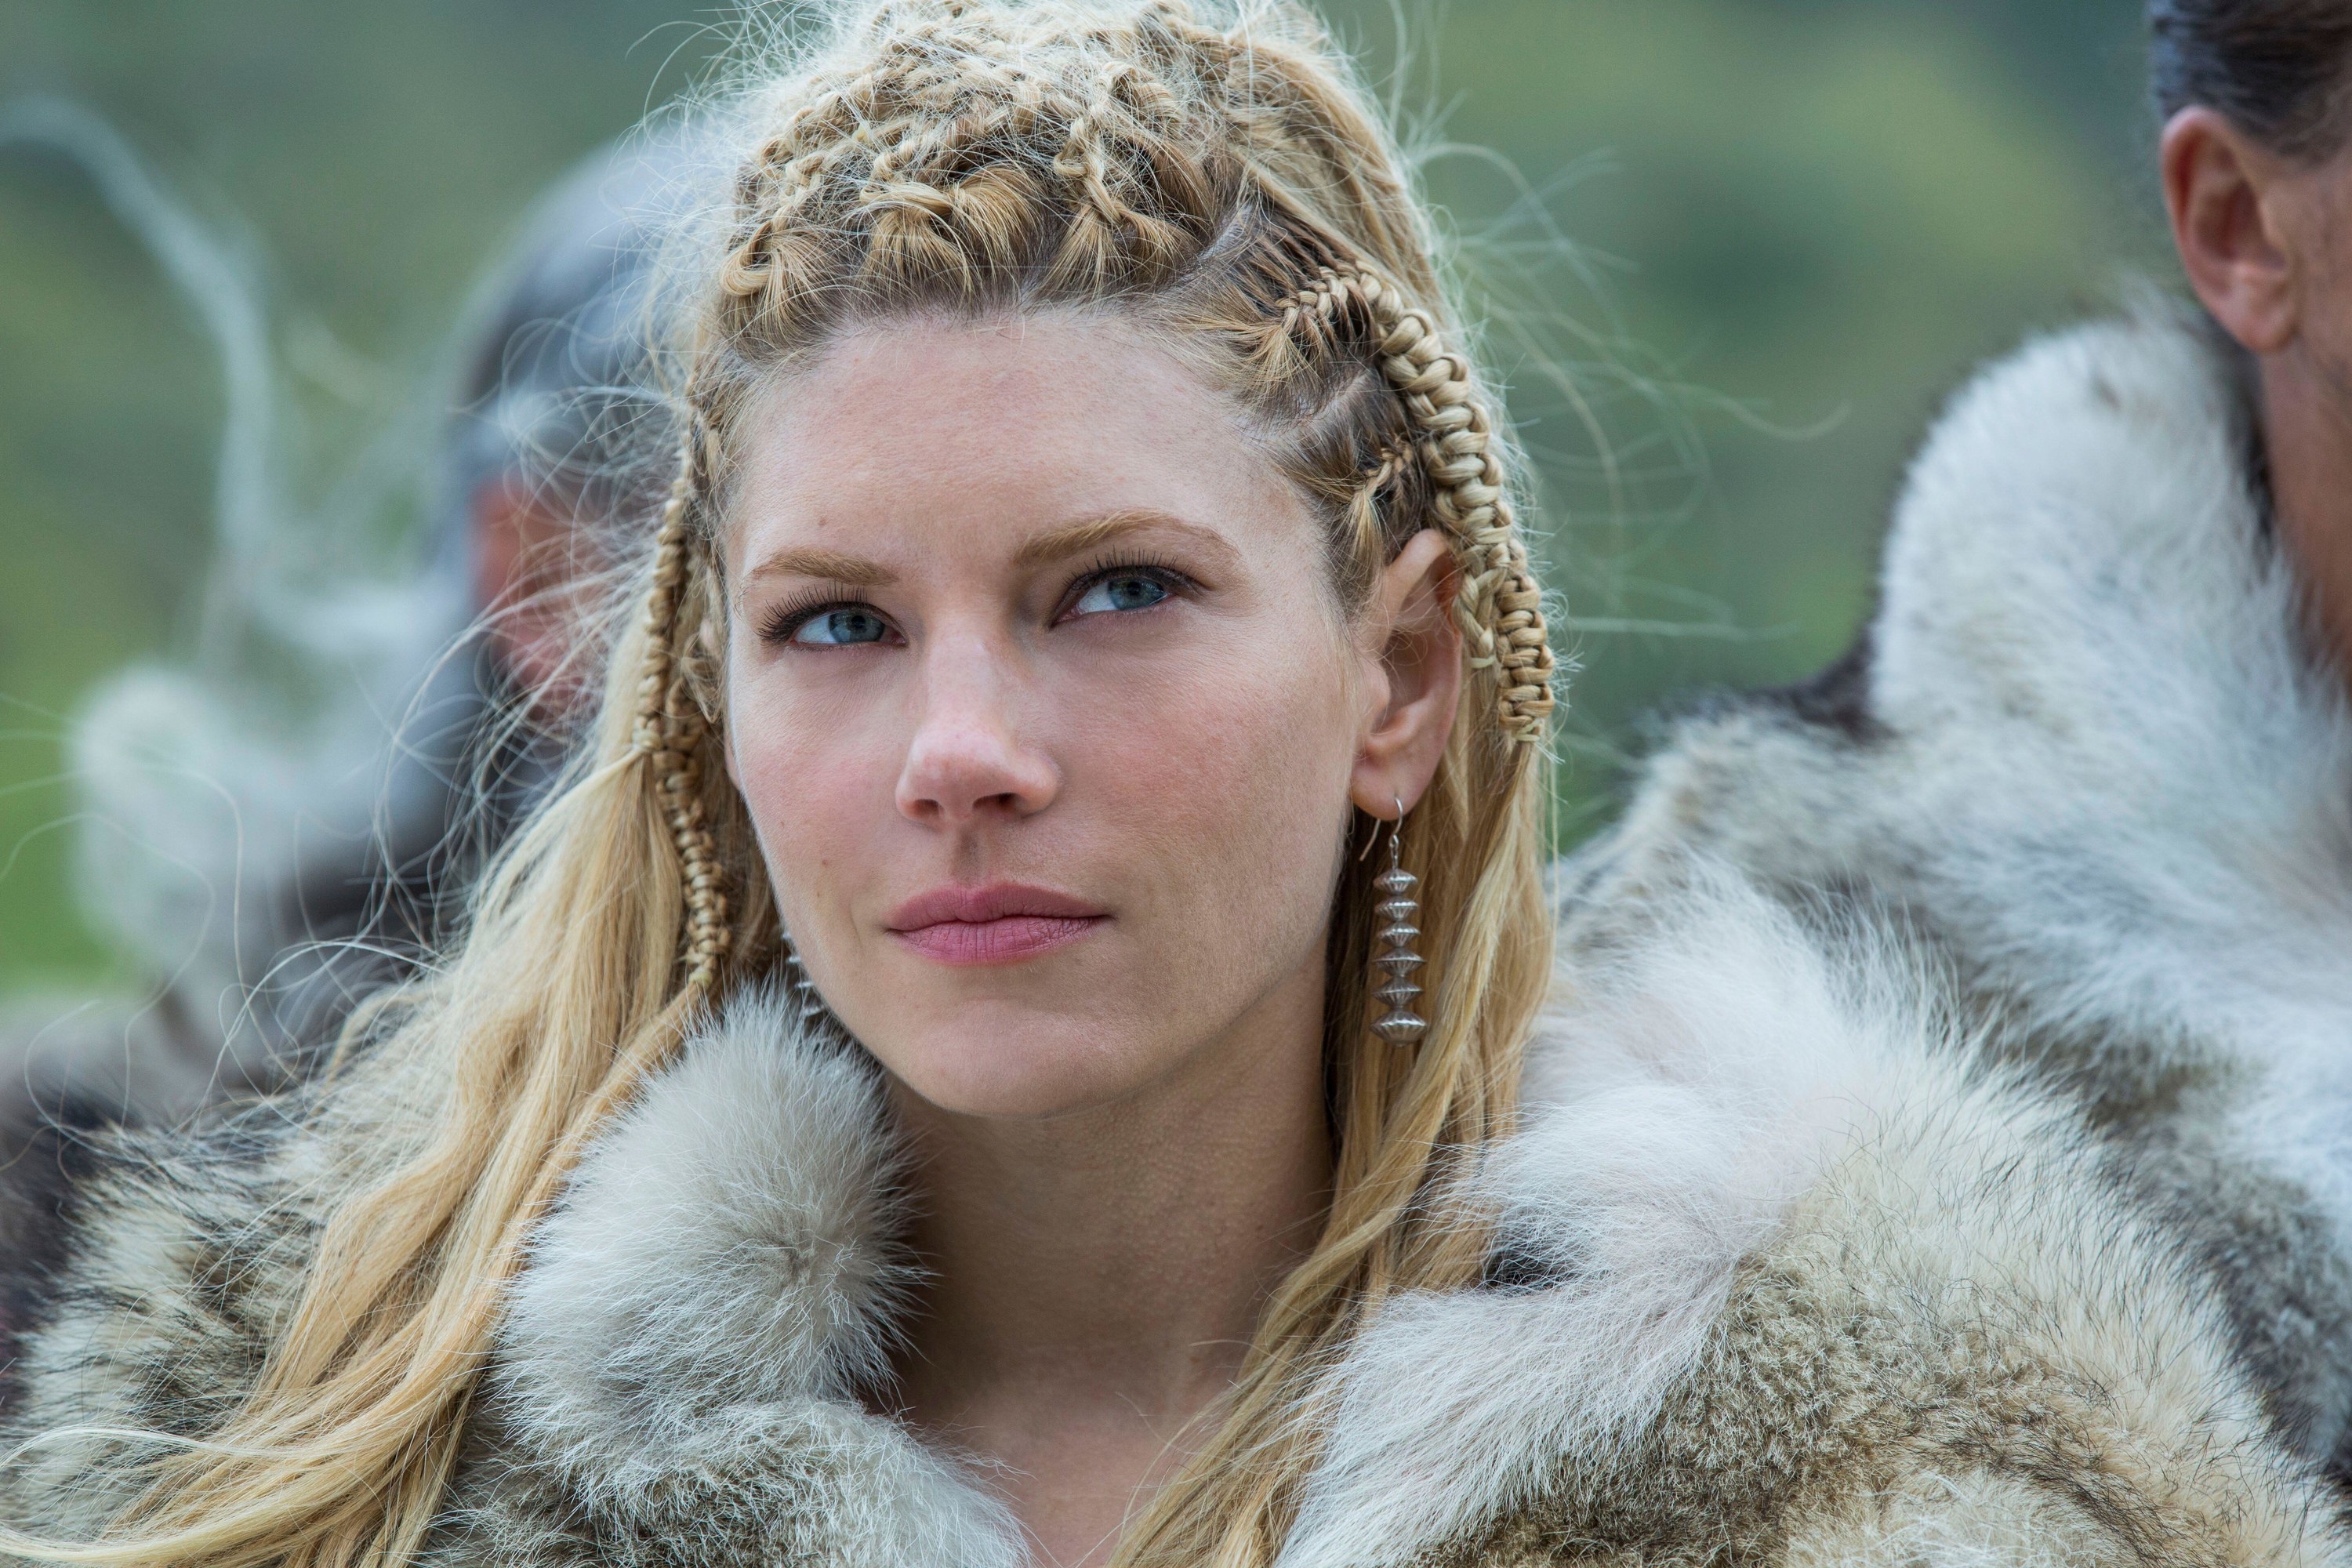 A viking woman offers a wry smile while observing a situation